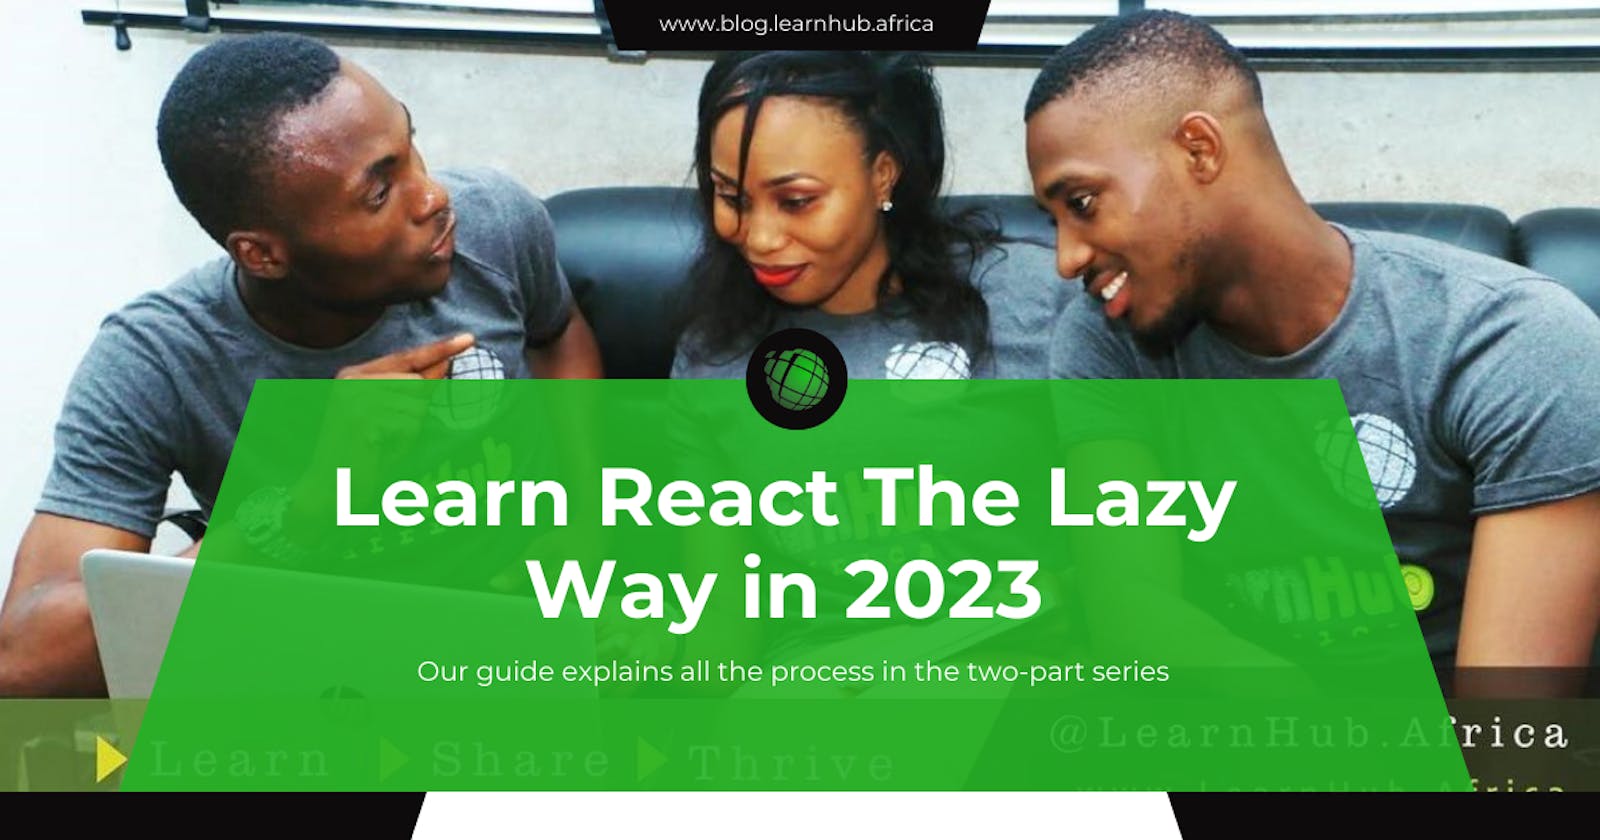 Learn React The Lazy Way in 2023